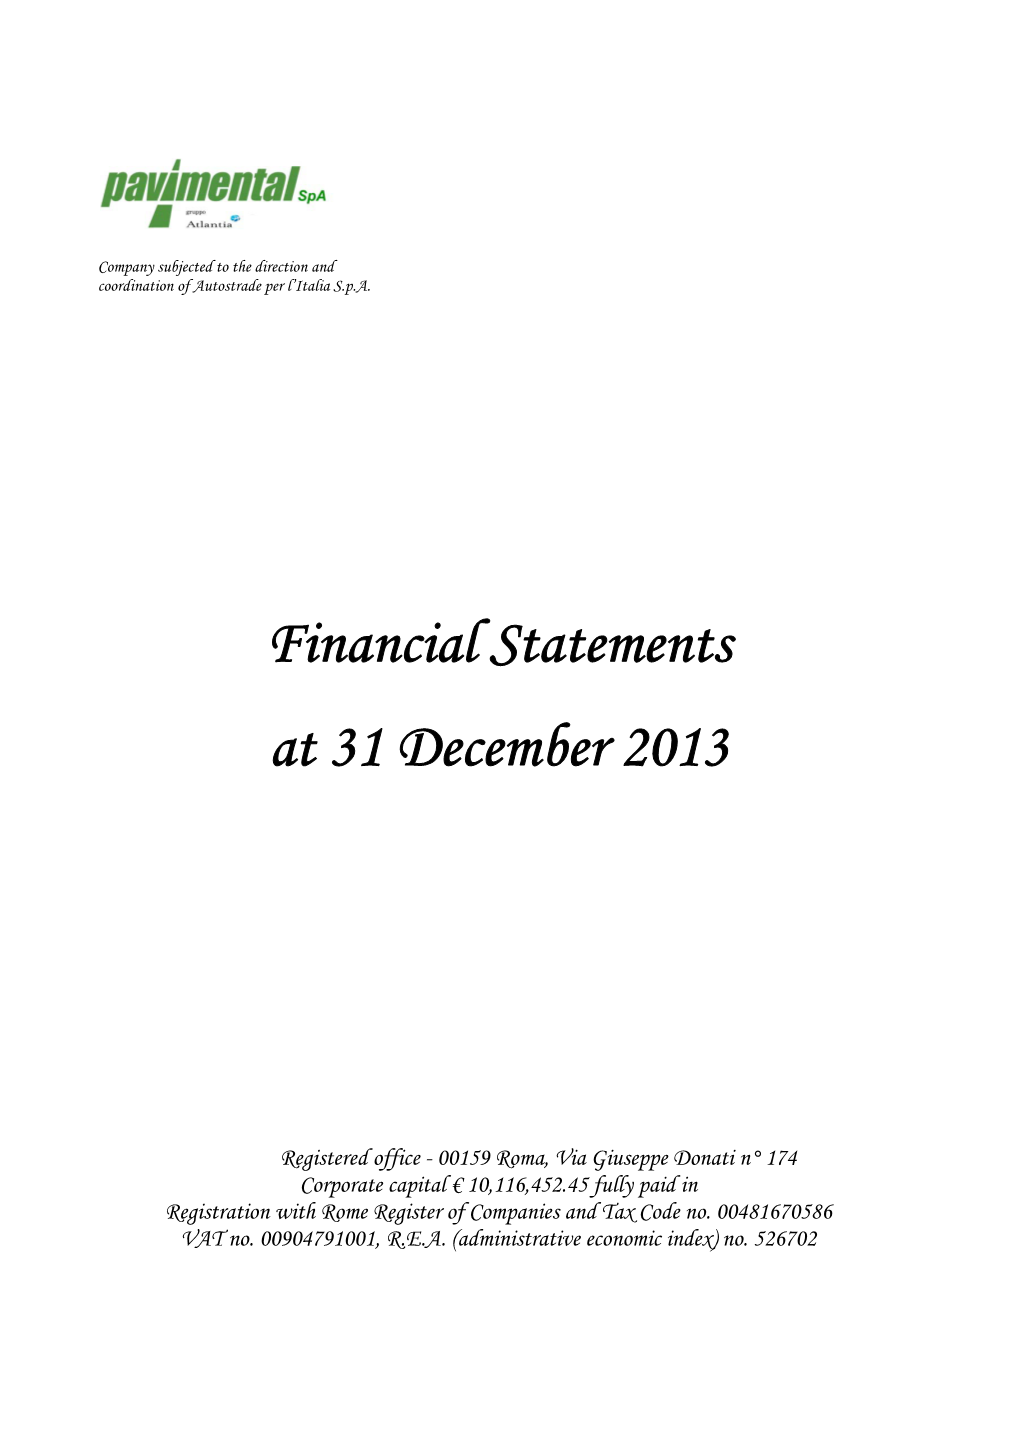 Financial Statements at 31 December 2013